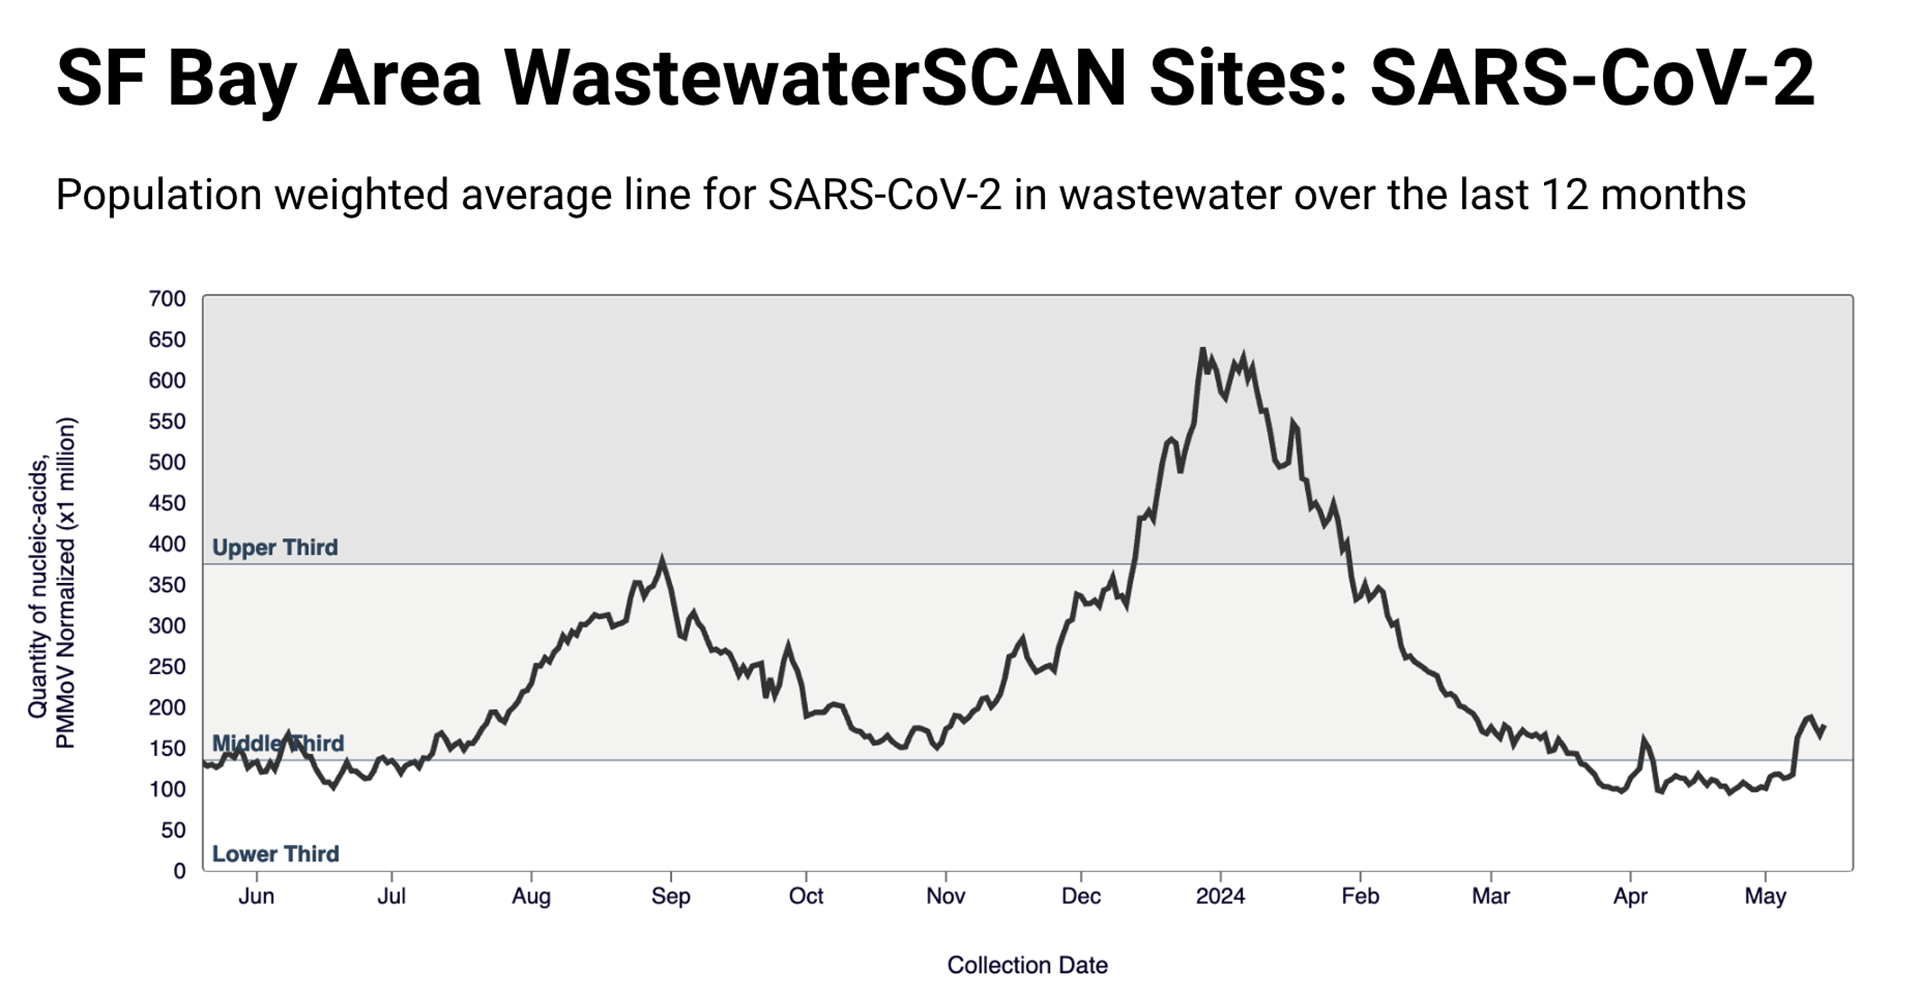 Early COVID-19 Surge in Bay Area Wastewater